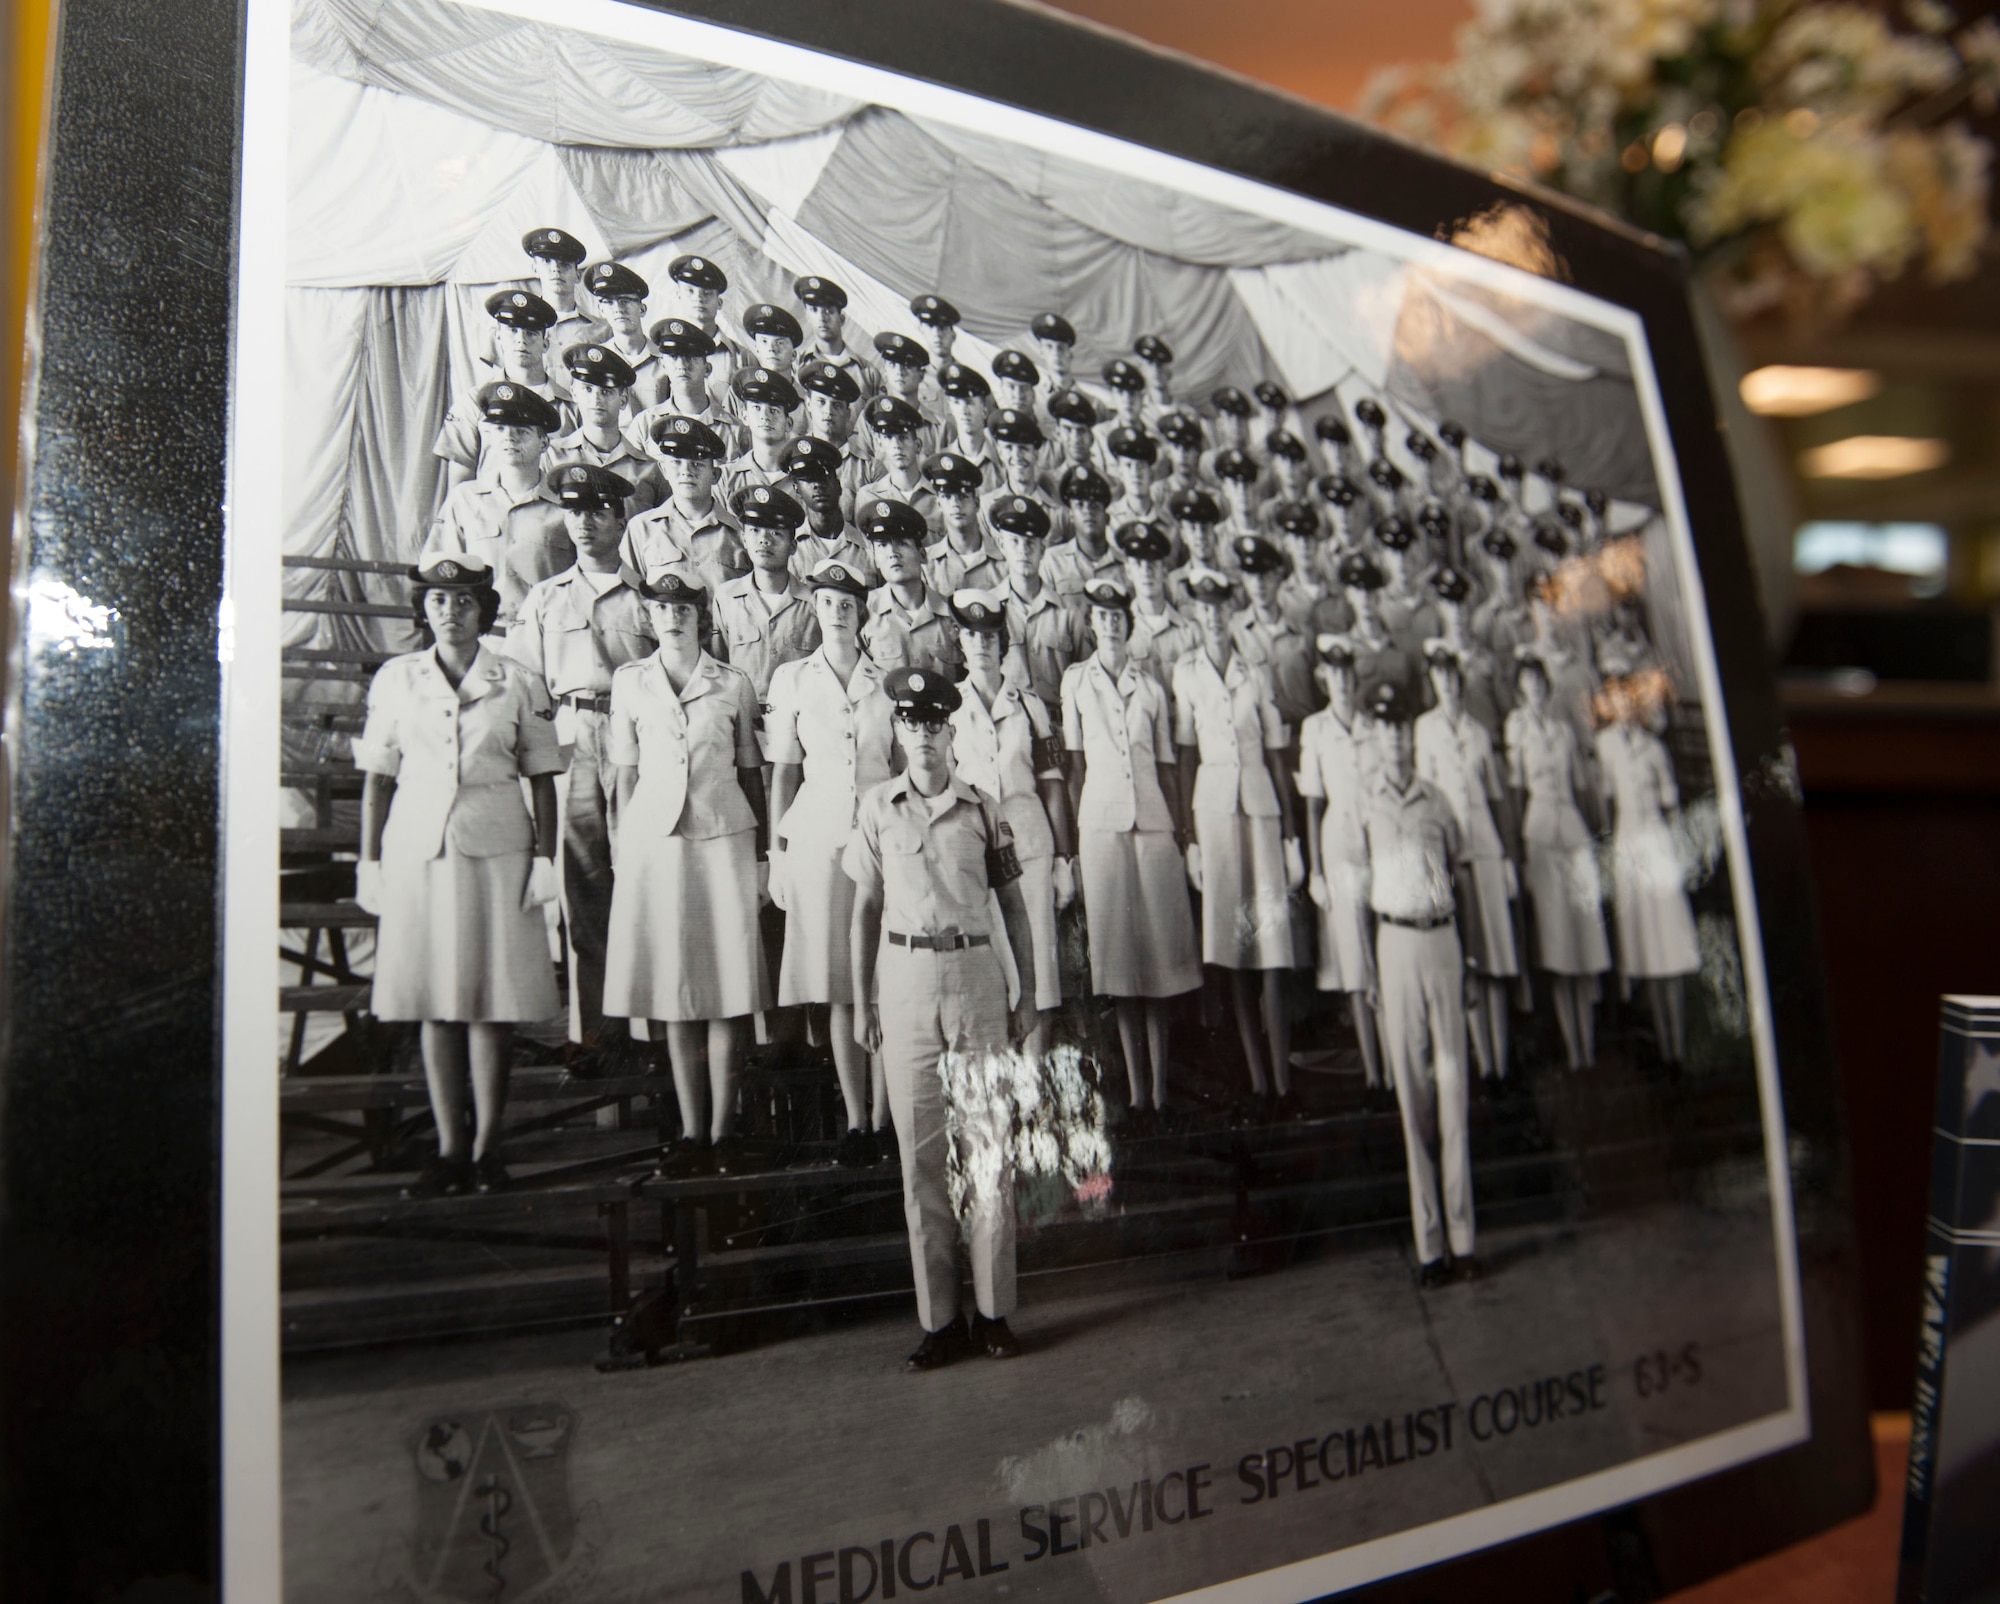 A picture the U.S. Air Force Medical Service Specialist Course graduate class of 1963 is displayed during a Women’s Equality Day presentation Aug. 26, 2014, on Buckley Air Force Base Colo. Women’s Equality Day commemorates the ratification of the 19th Amendment, granting women the right to vote. Today, it is celebrated in honor of modern day women’s rights to be seen as equals to men. (U.S. Air Force photo by Airman 1st Class Samantha Saulsbury/Released)